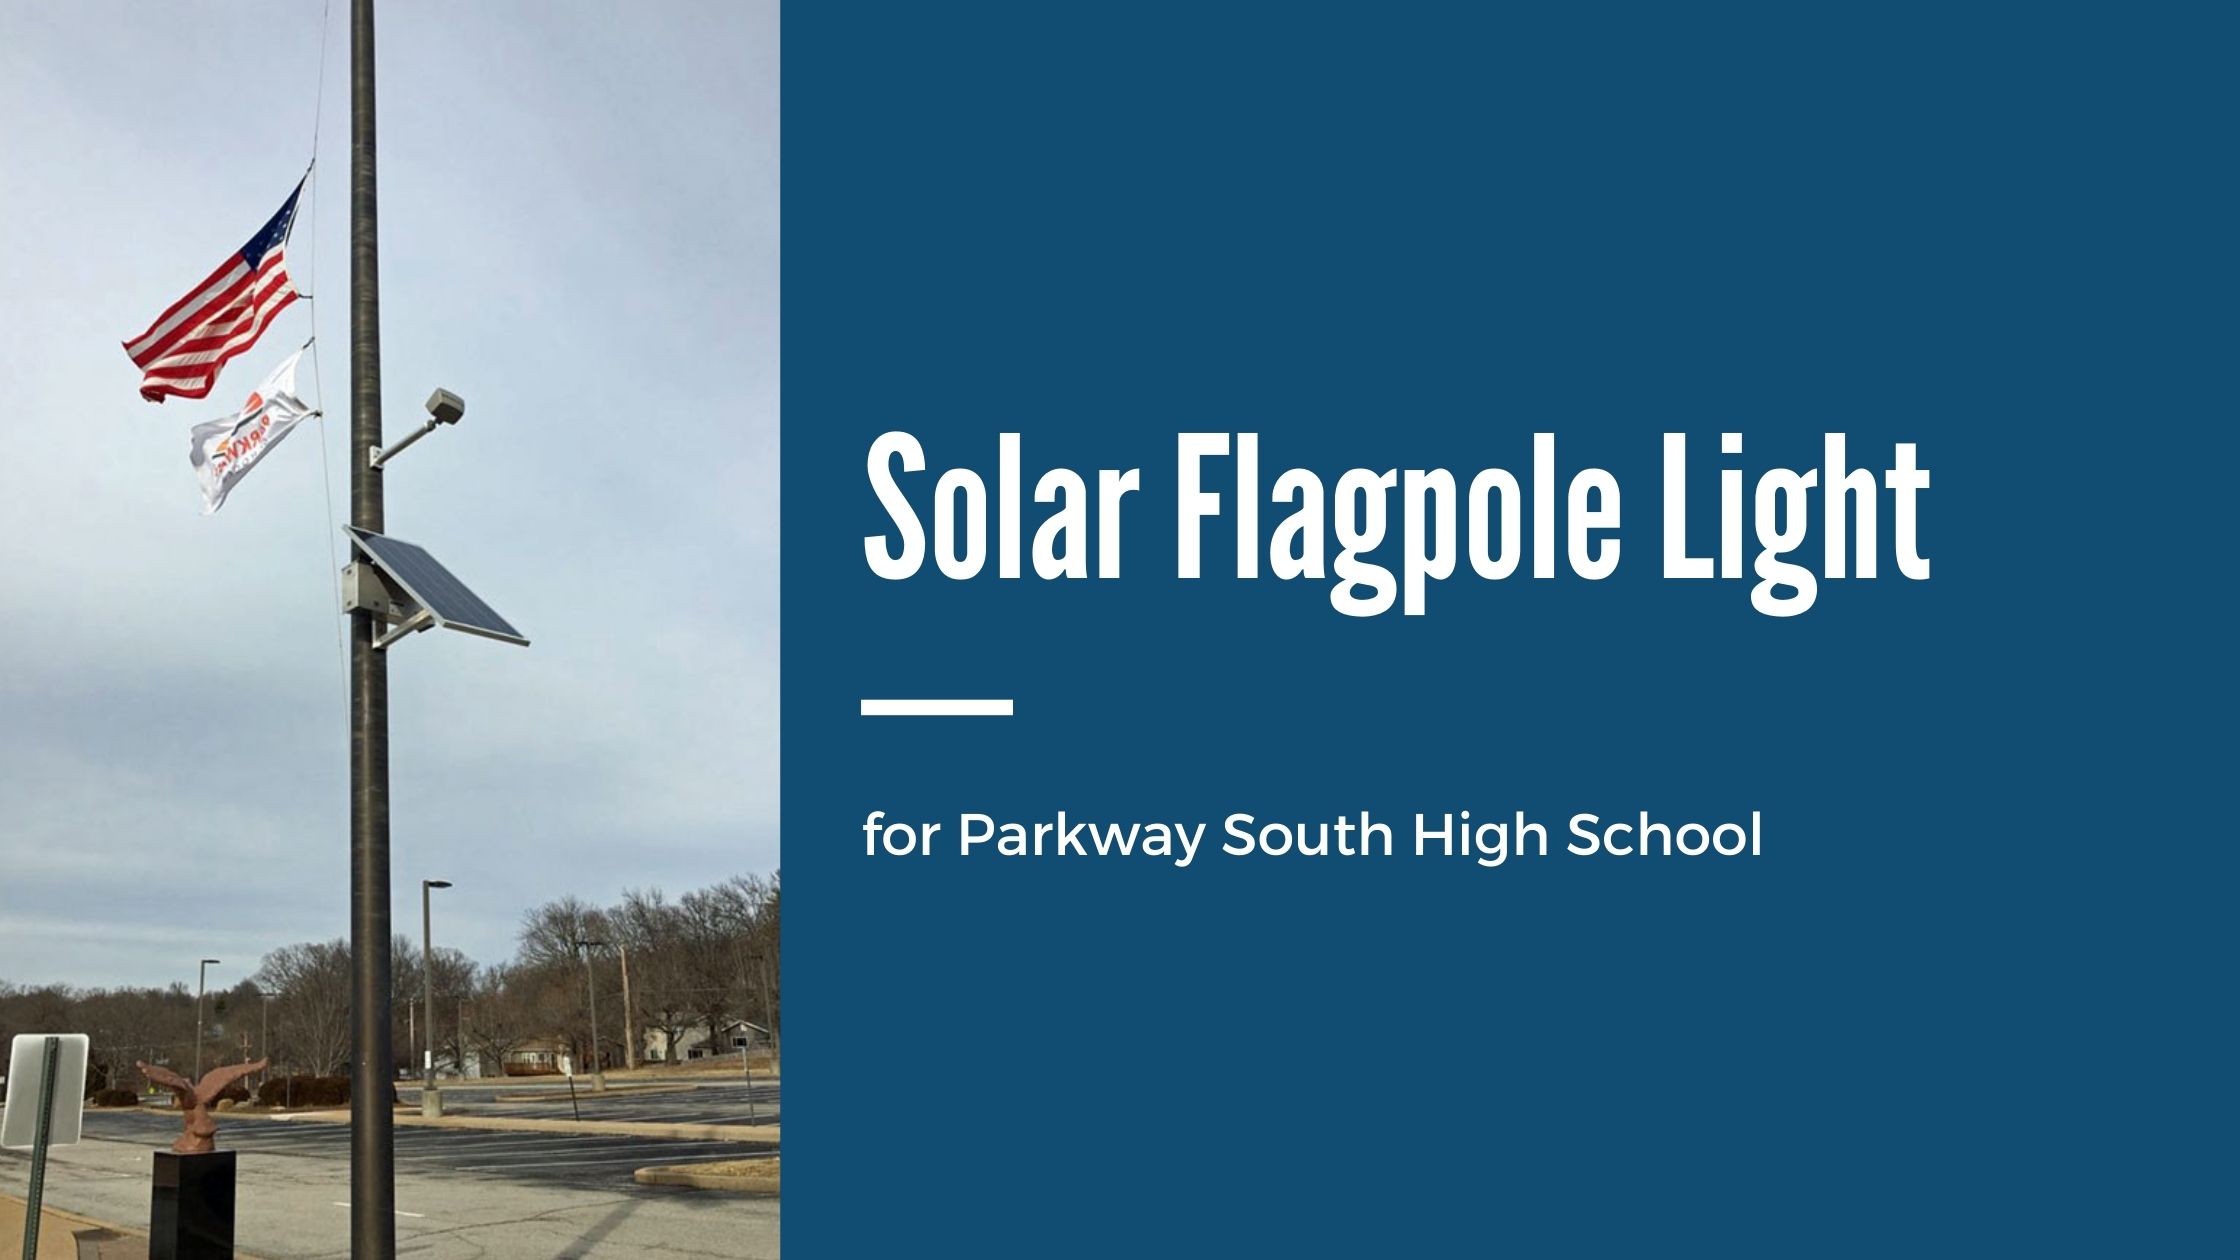 Solar Flagpole Light for Parkway South High School